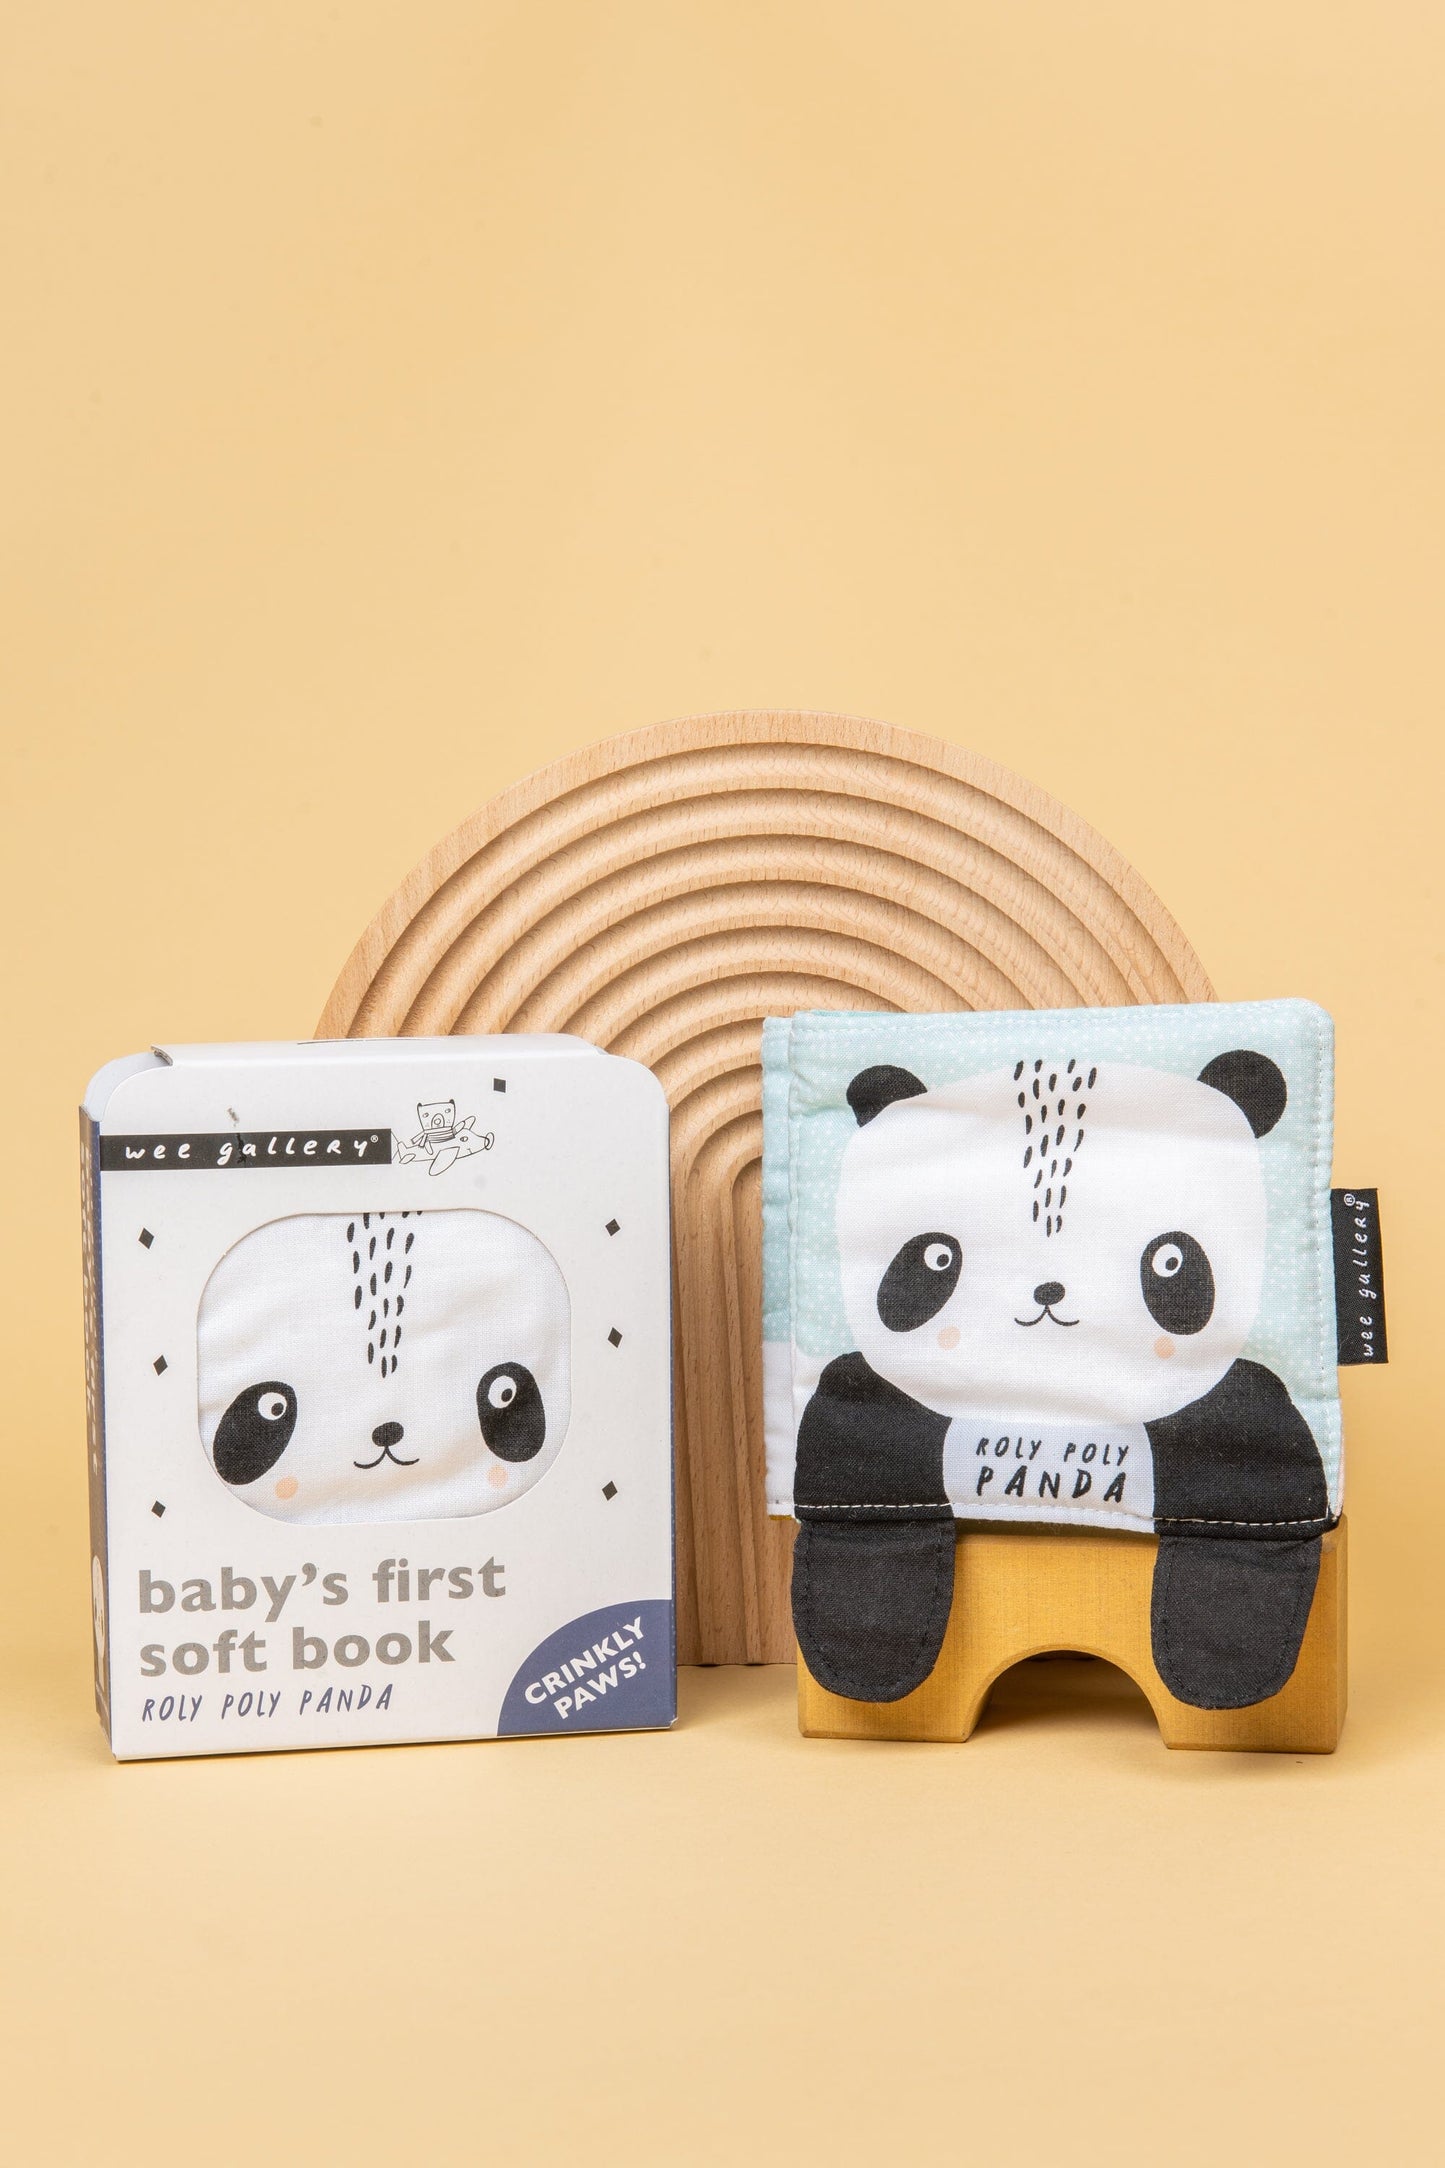 Baby's First Cloth Book book Wee Gallery Roly Poly Panda 